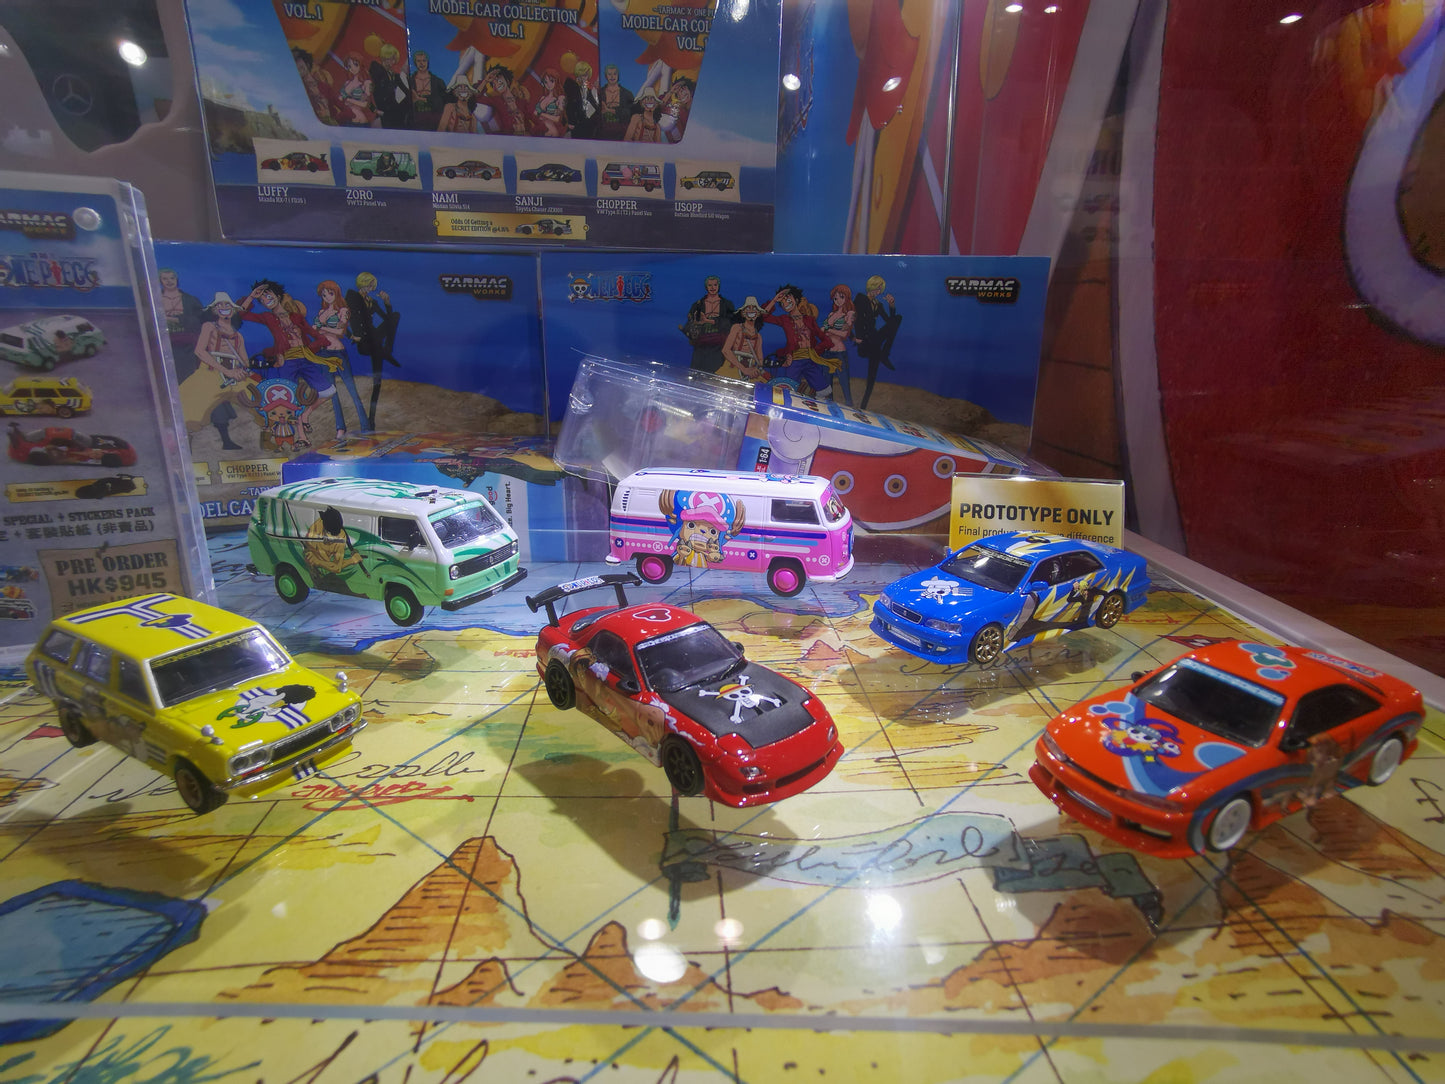 Tarmac Works x One Piece Model Car Collection VOL.1 - 6 Cars Set - COL